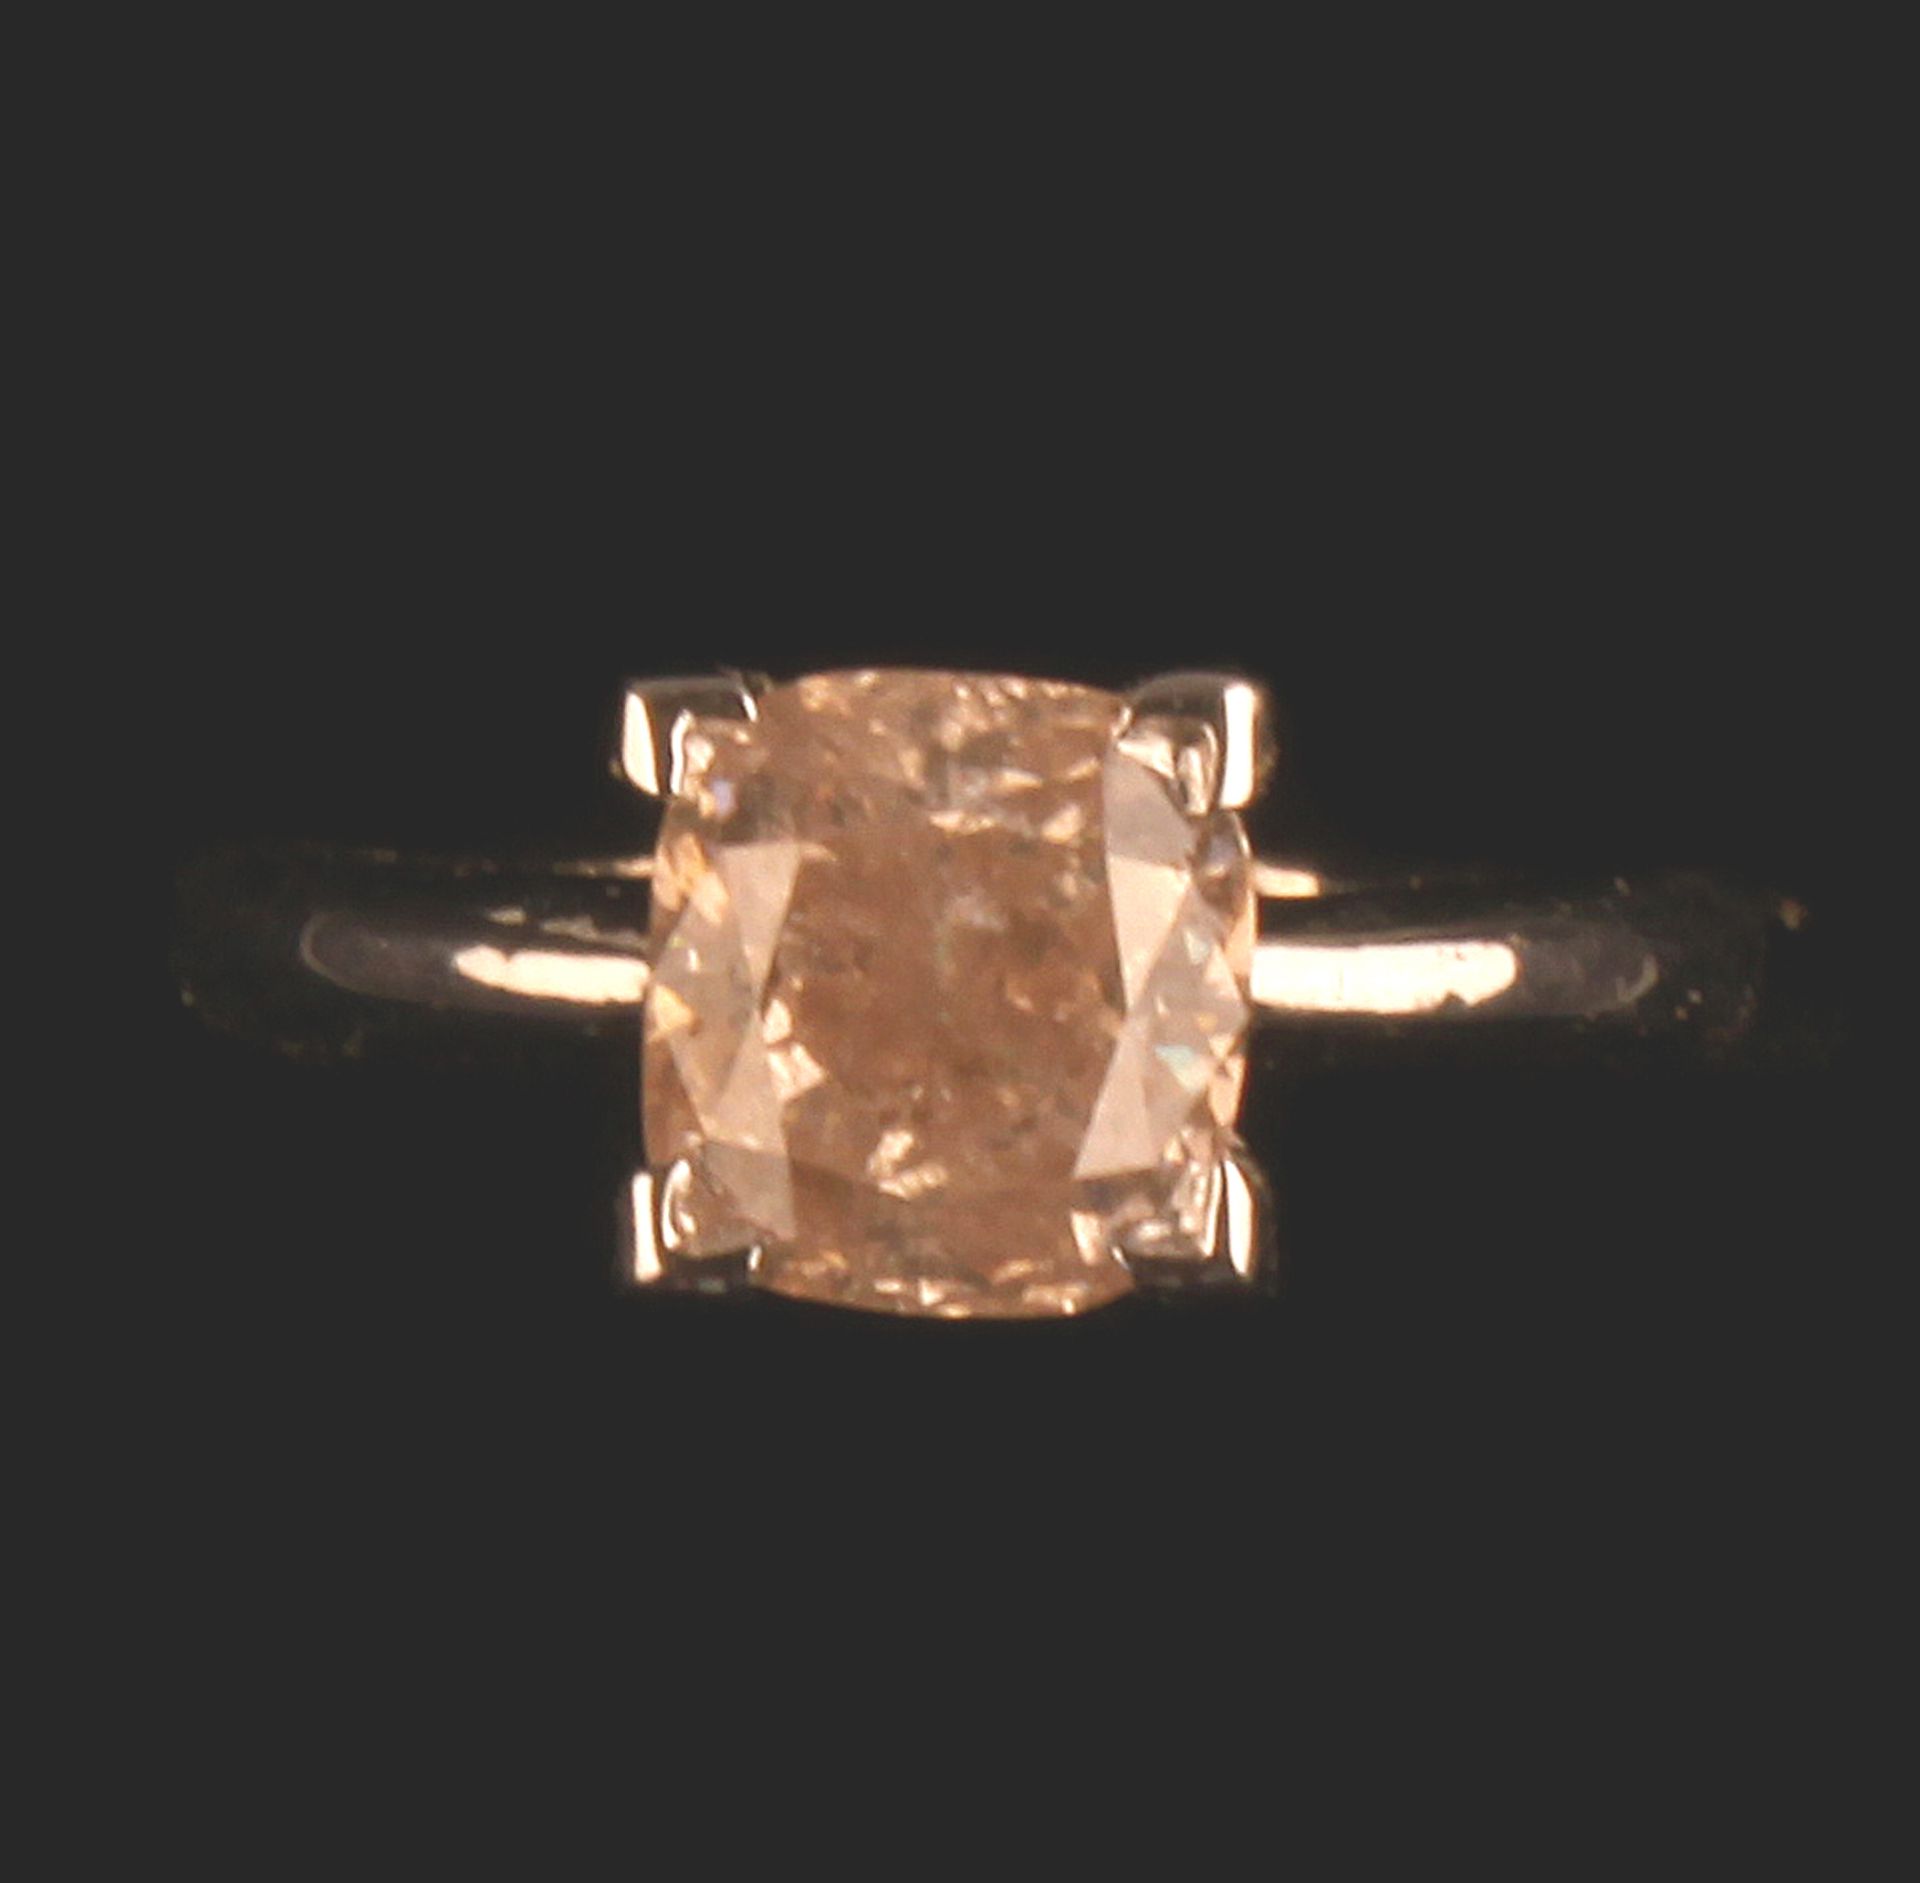 VERY RARE NATURAL 2.16ct PINK DIAMOND **GIA REPORT 2207535275** 18ct GOLD RING - Image 3 of 6